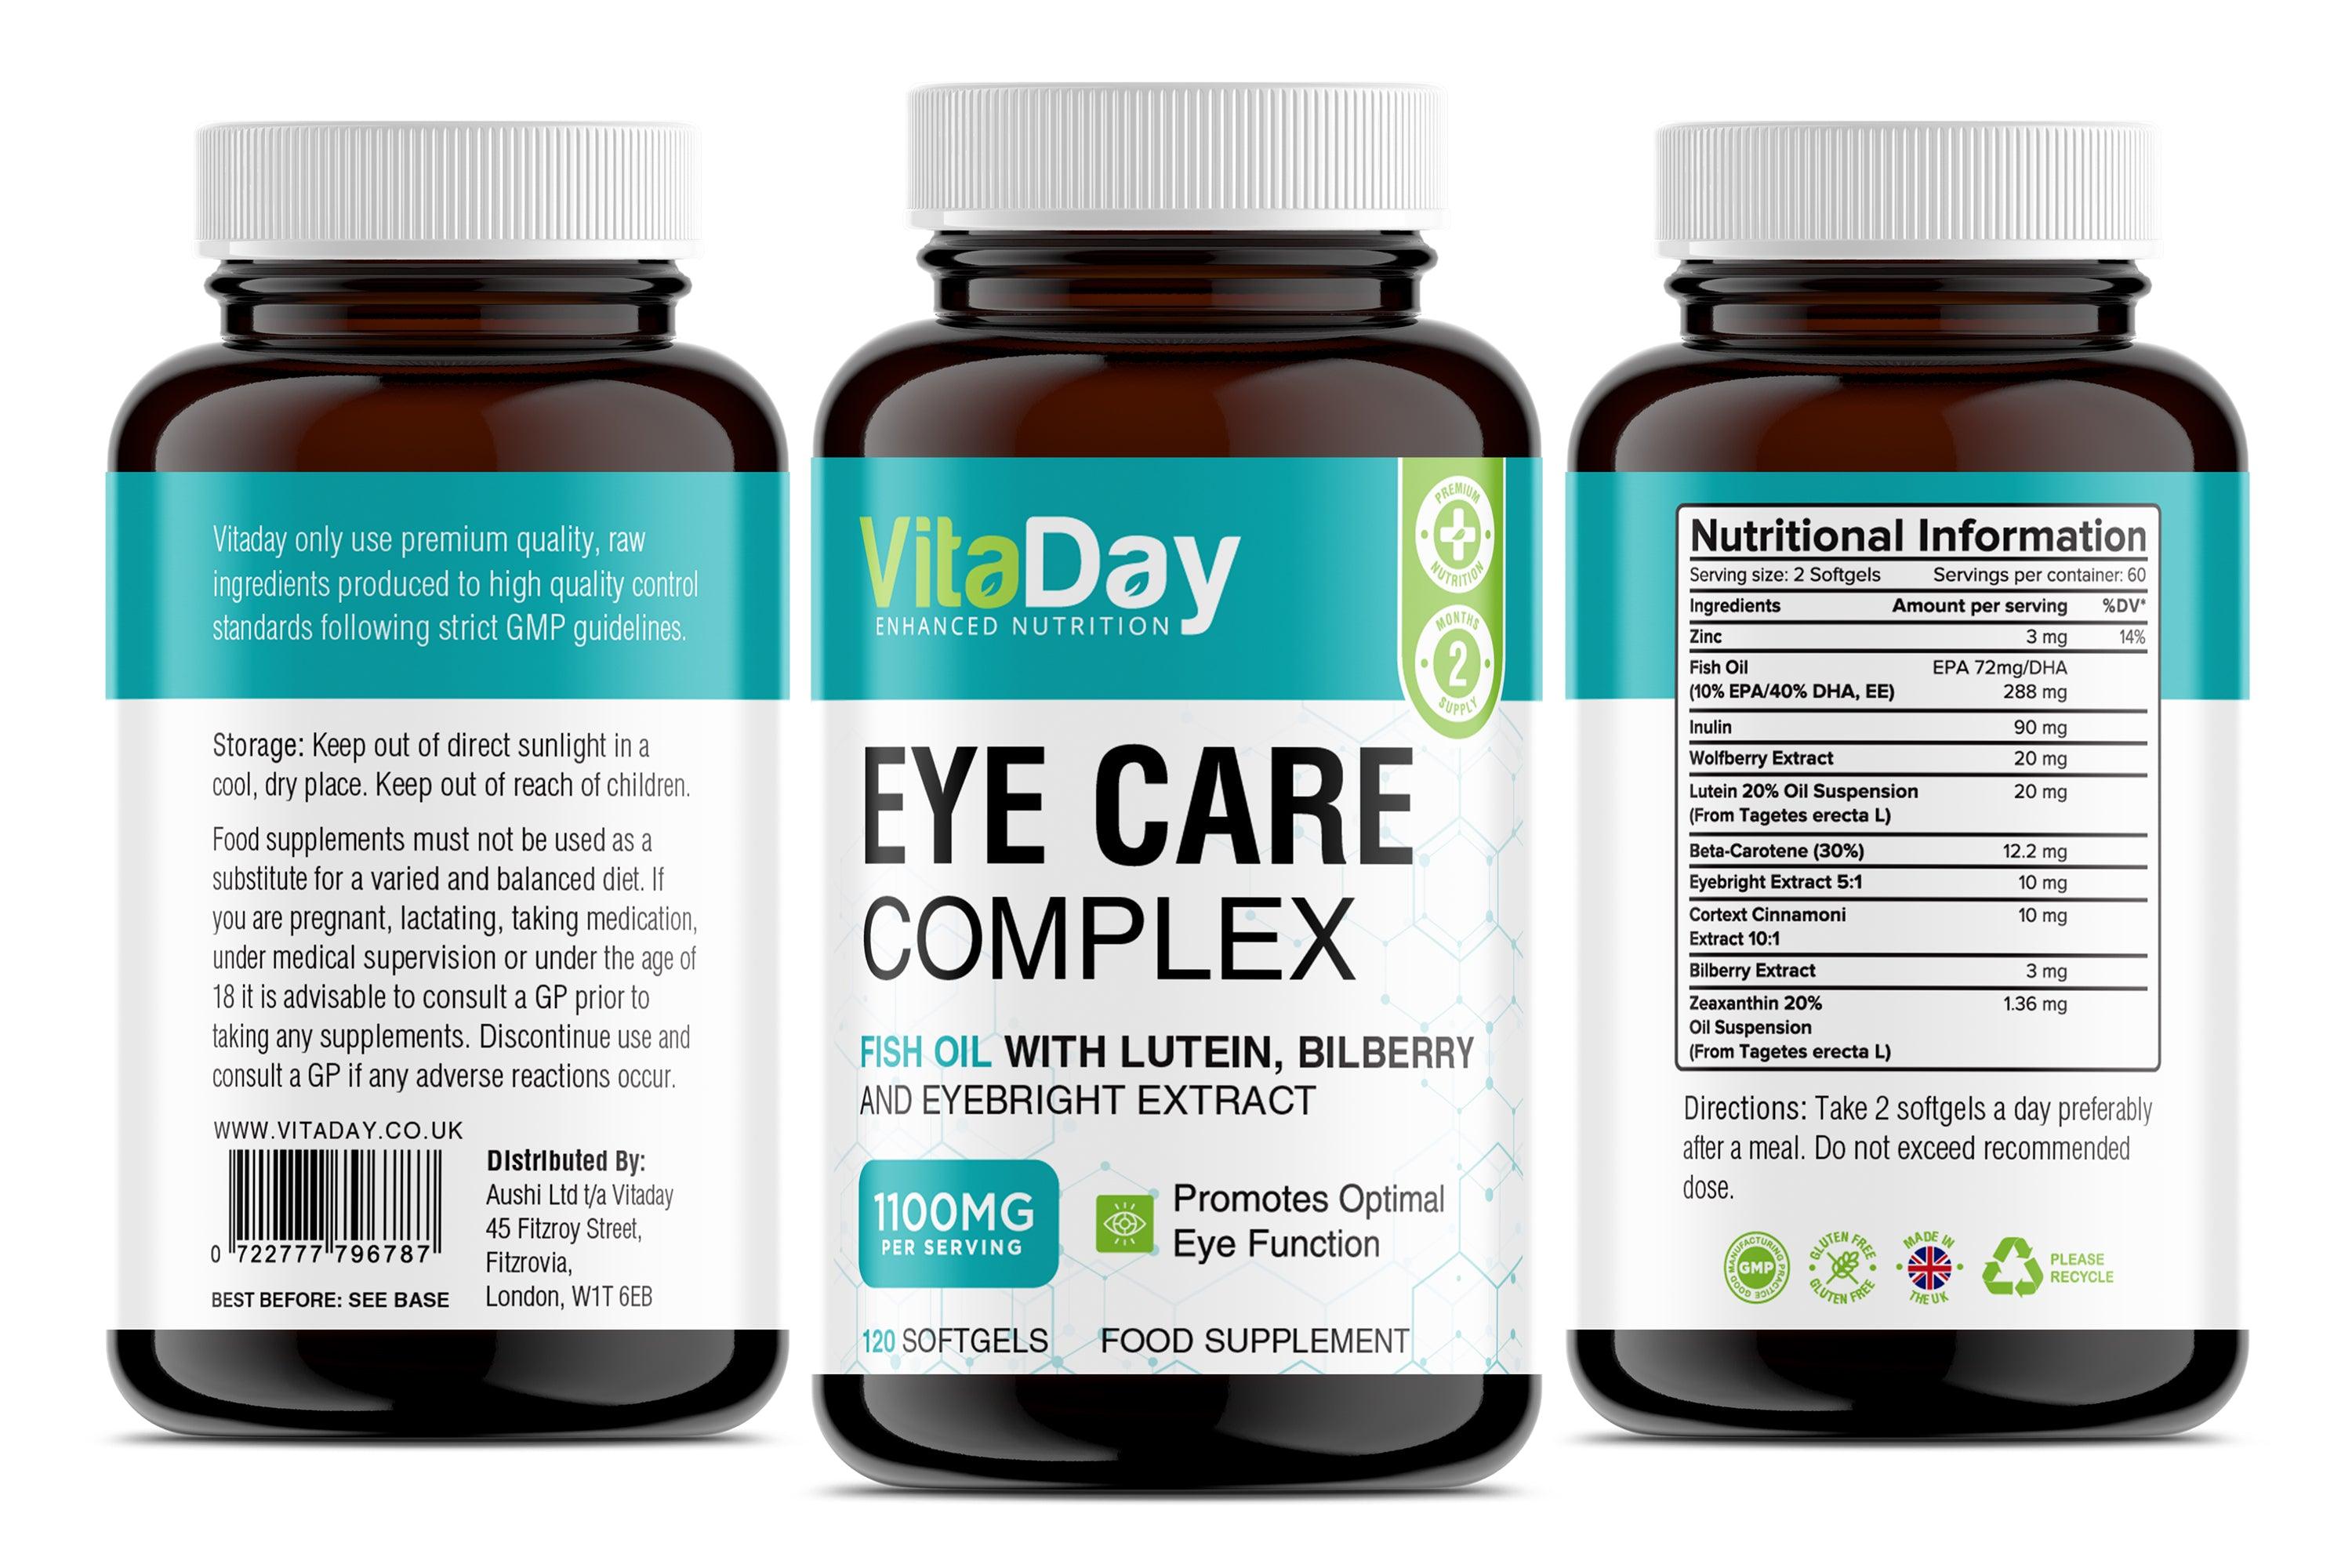 Eye Care Complex - Fish oil with Lutein Bilberry and Eyebright Extract Vitamin - Vitaday